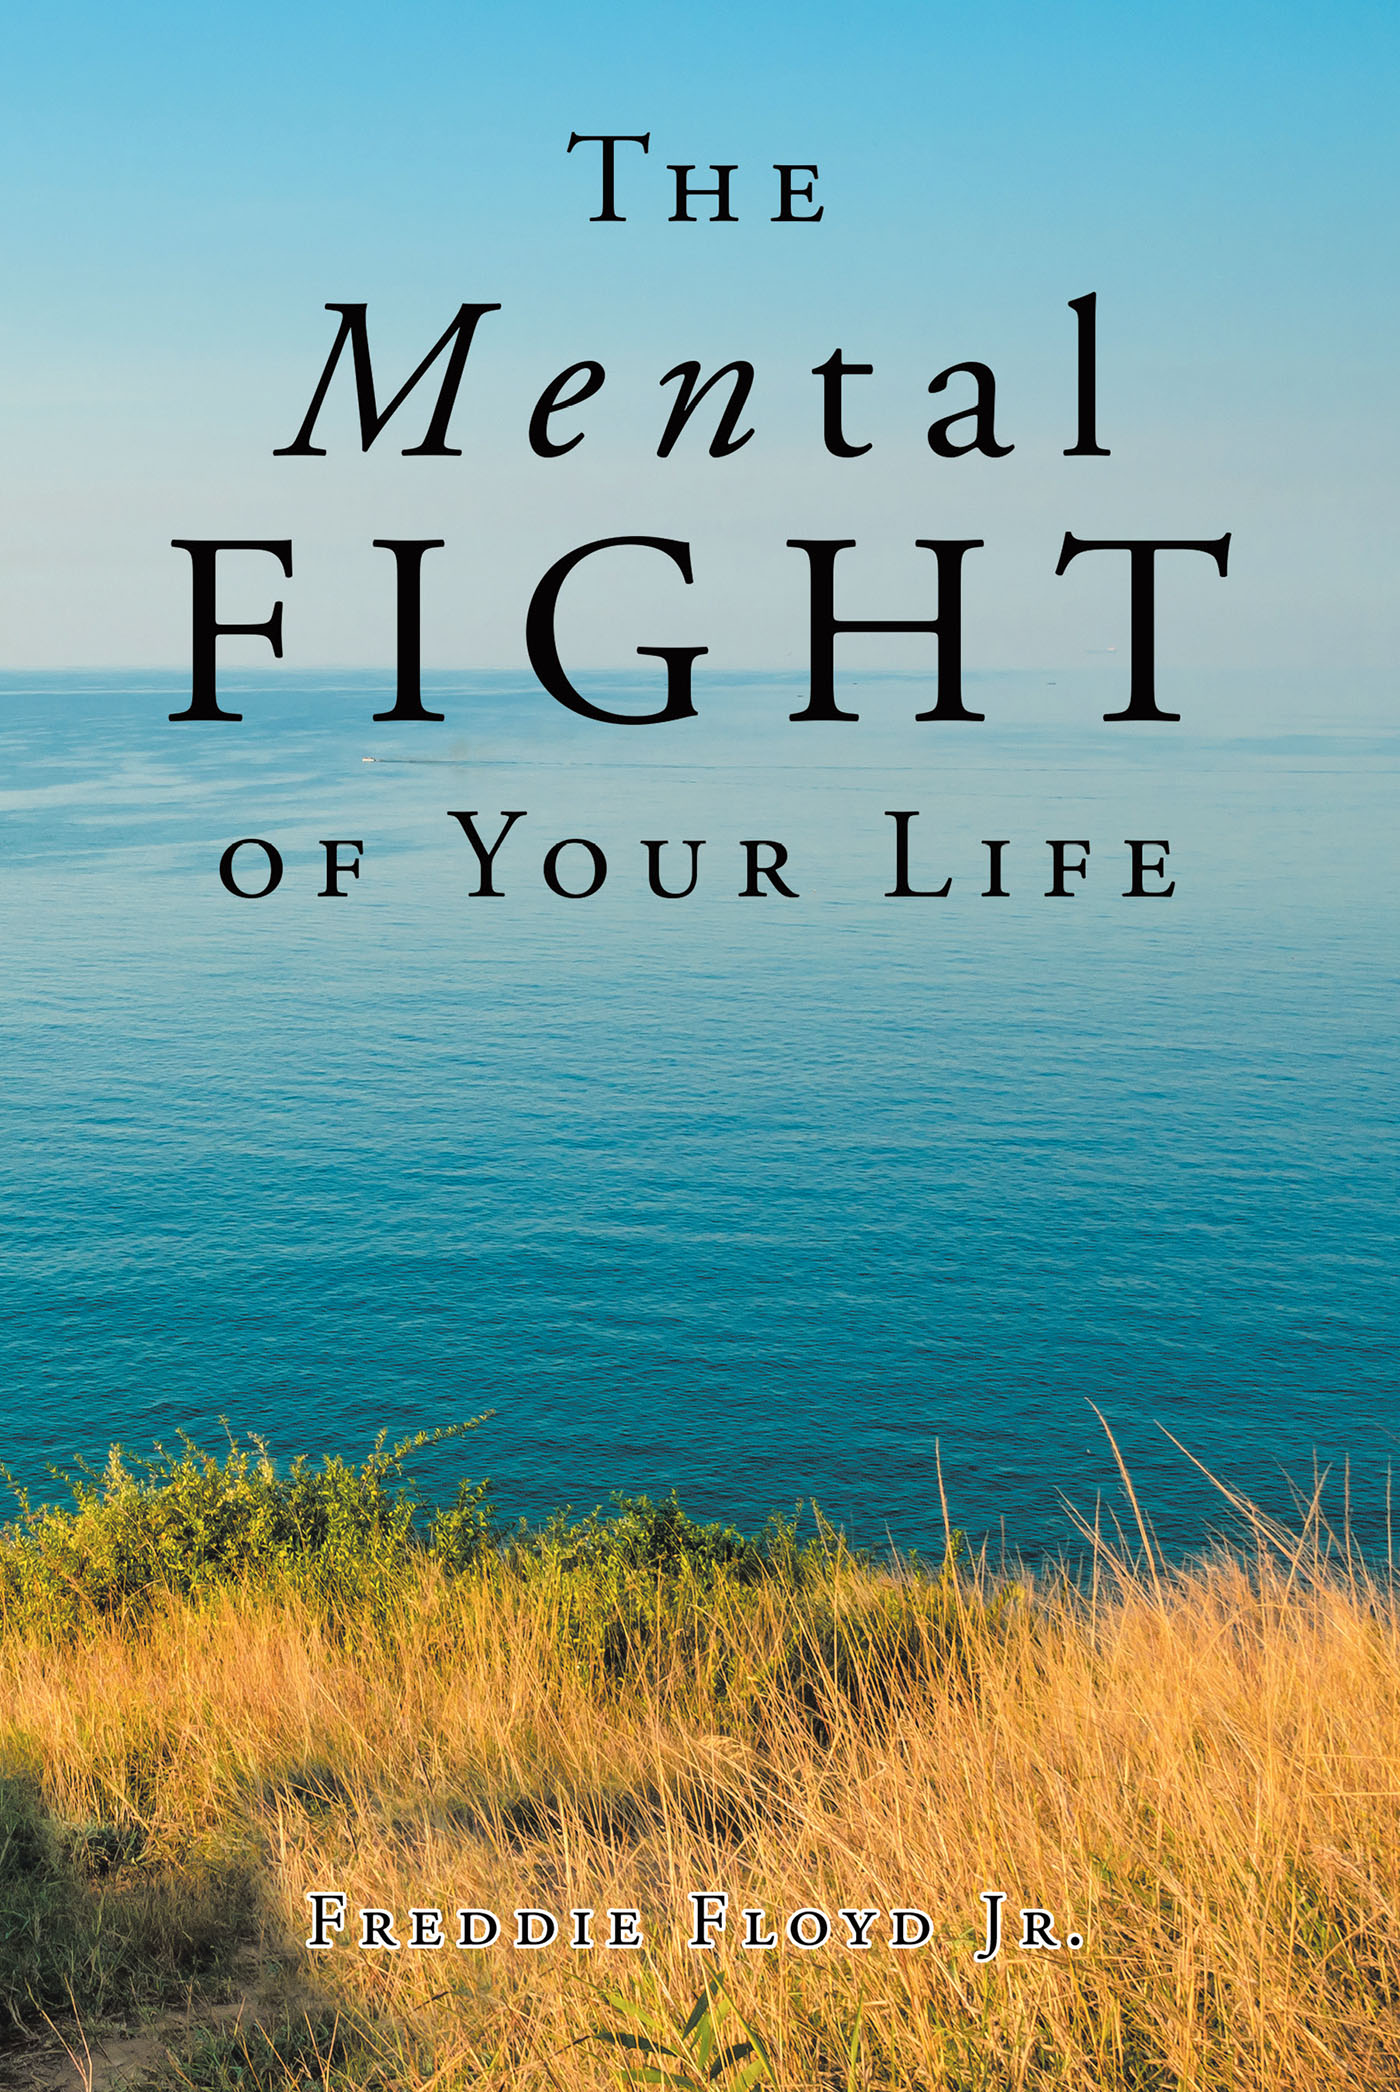 Author Freddie Floyd Jr.’s New Book "The MENtal Fight of Your Life" is an Engaging Tool for Becoming a Better Partner in One's Relationship Through a Connection with God